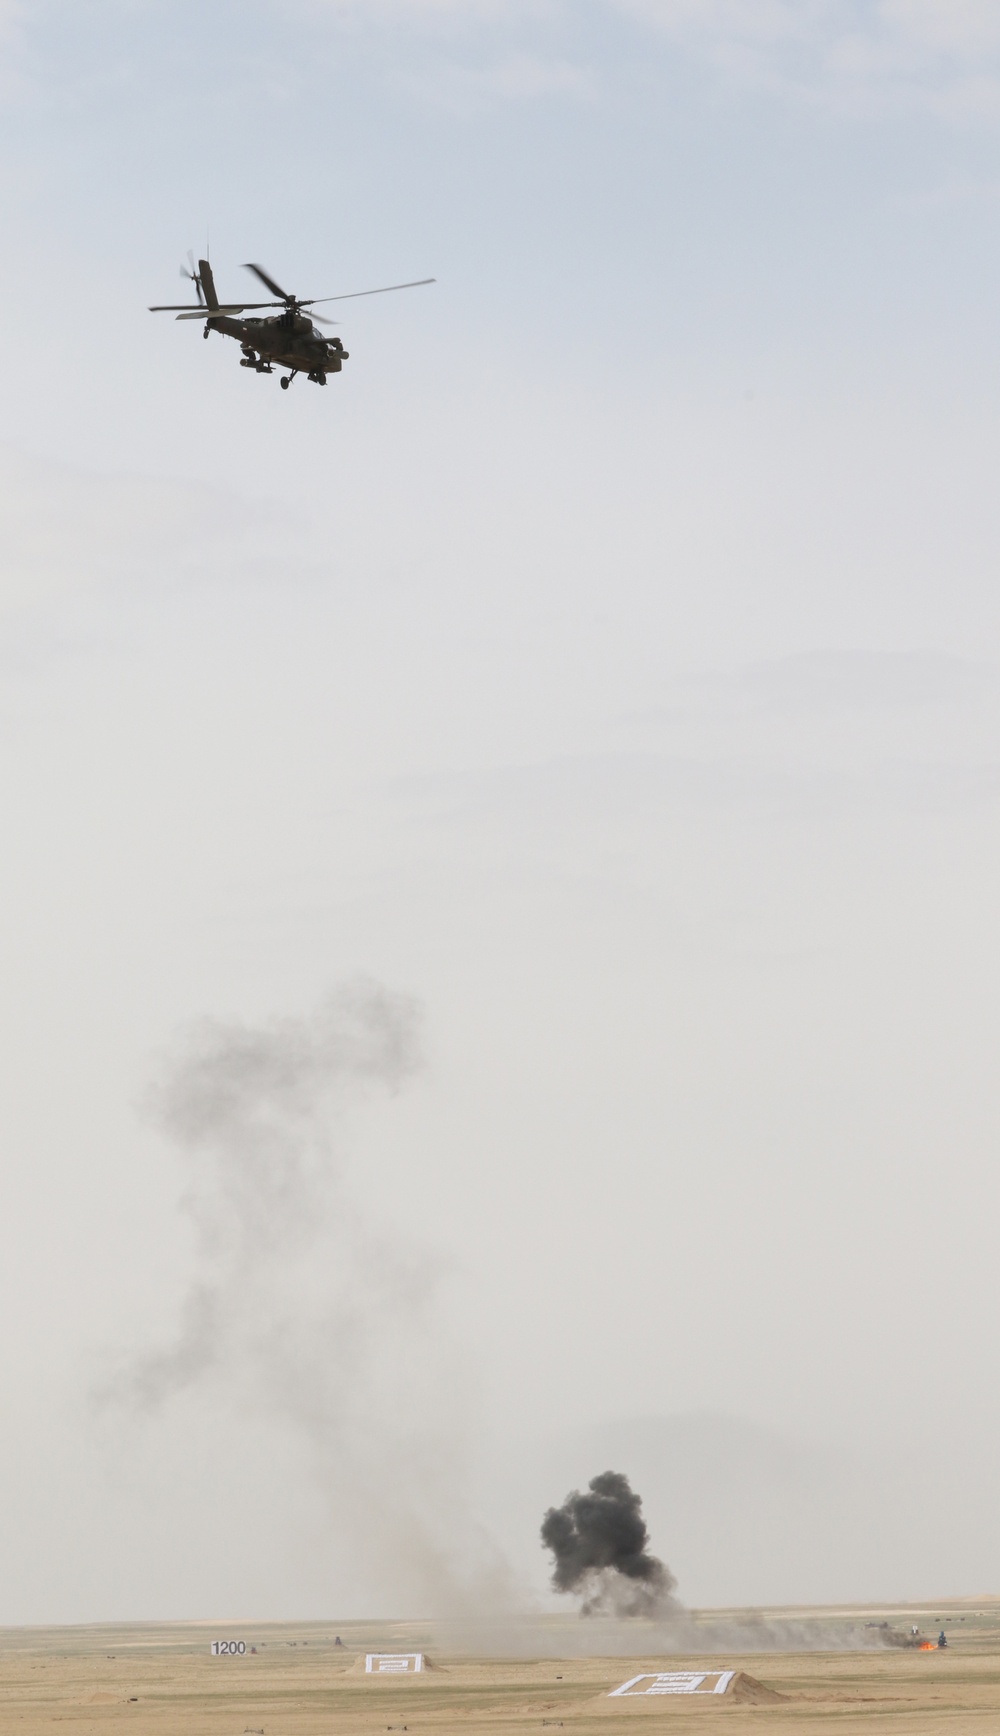 A Kuwait Land Forces Apache helicopter fires rounds down range during exercise Al Tahreer